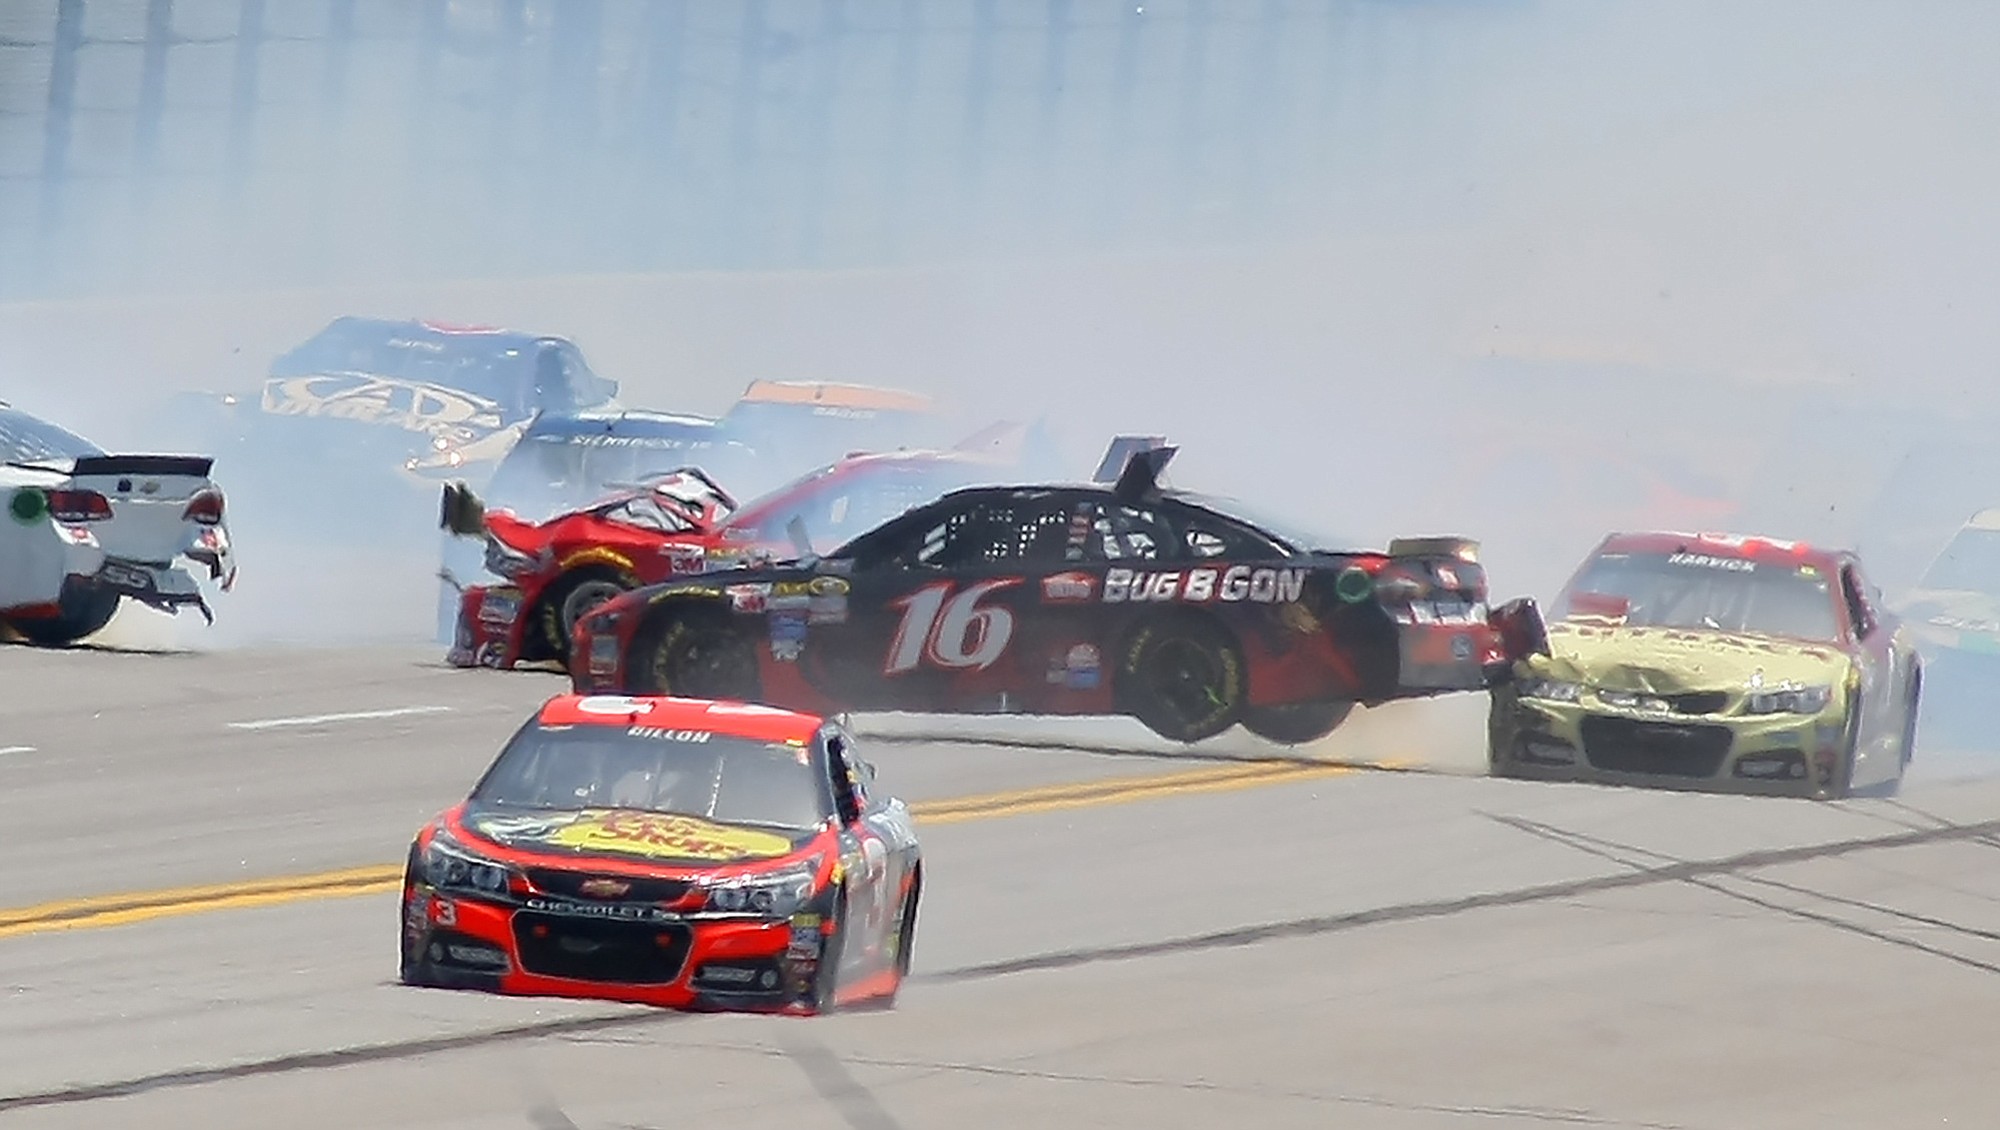 Greg Biffle (16) is lifted by Kevin Harvick, right, in a multi-car crash as Austin Dillon (3) drives past them during the Geico 500 NASCAR Sprint Cup race at Talladega Superspeedway, Sunday, May 3, 2015, in Talladega, Ala. Biffle would finish the race 37th, 41 laps down after his team made repairs to the car.